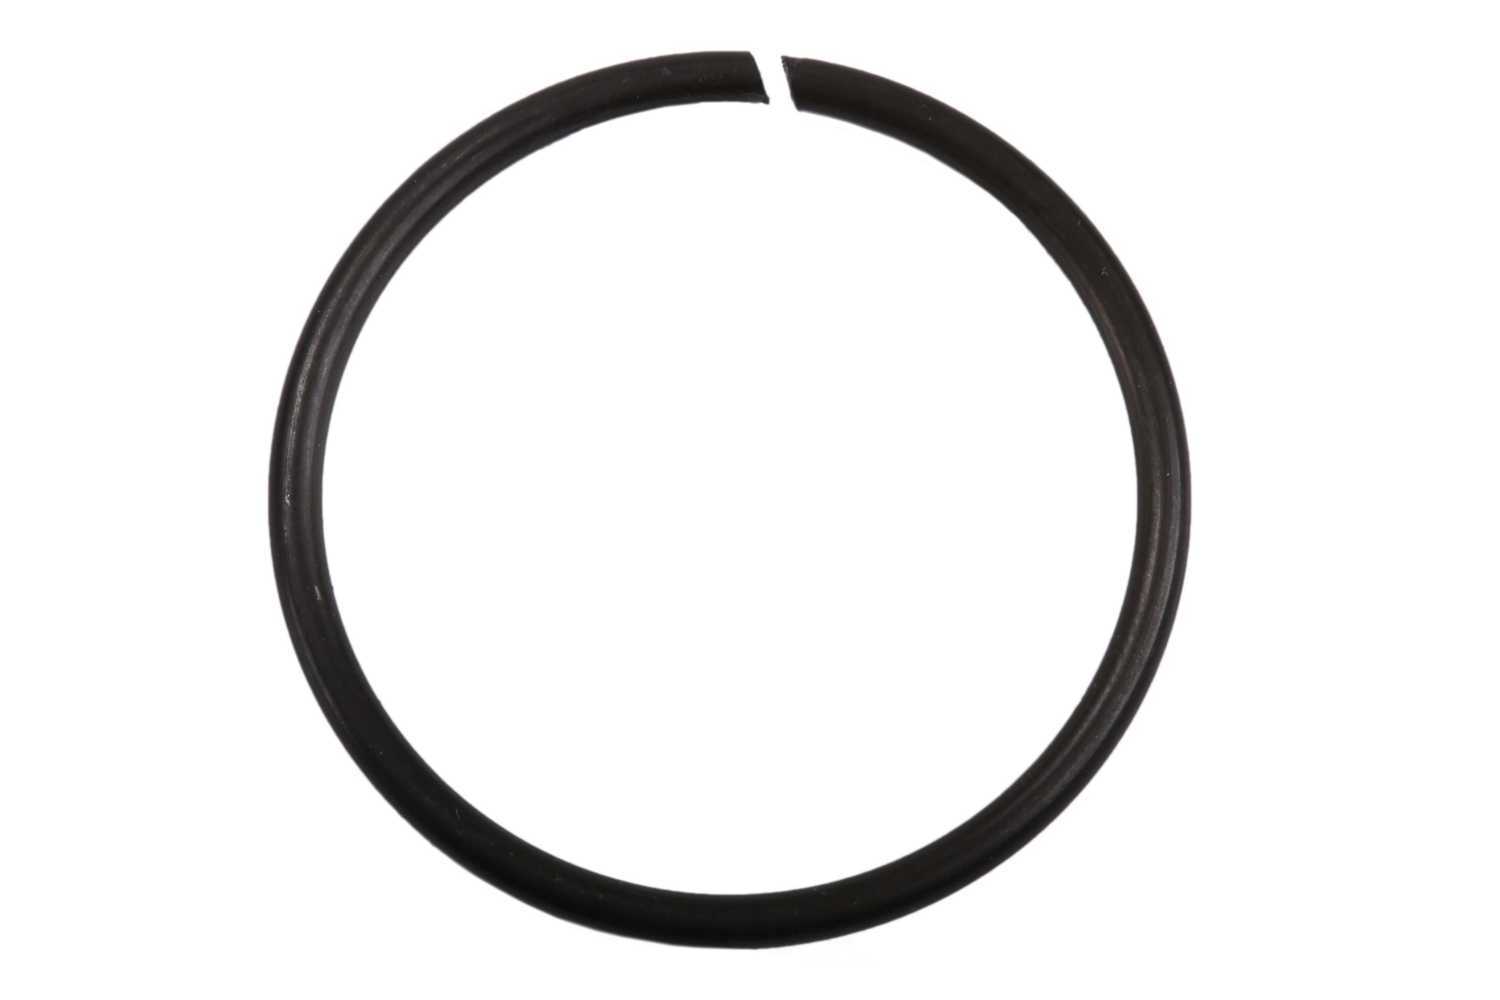 GM GENUINE PARTS - Drive Axle Shaft Snap Ring - GMP 11603383